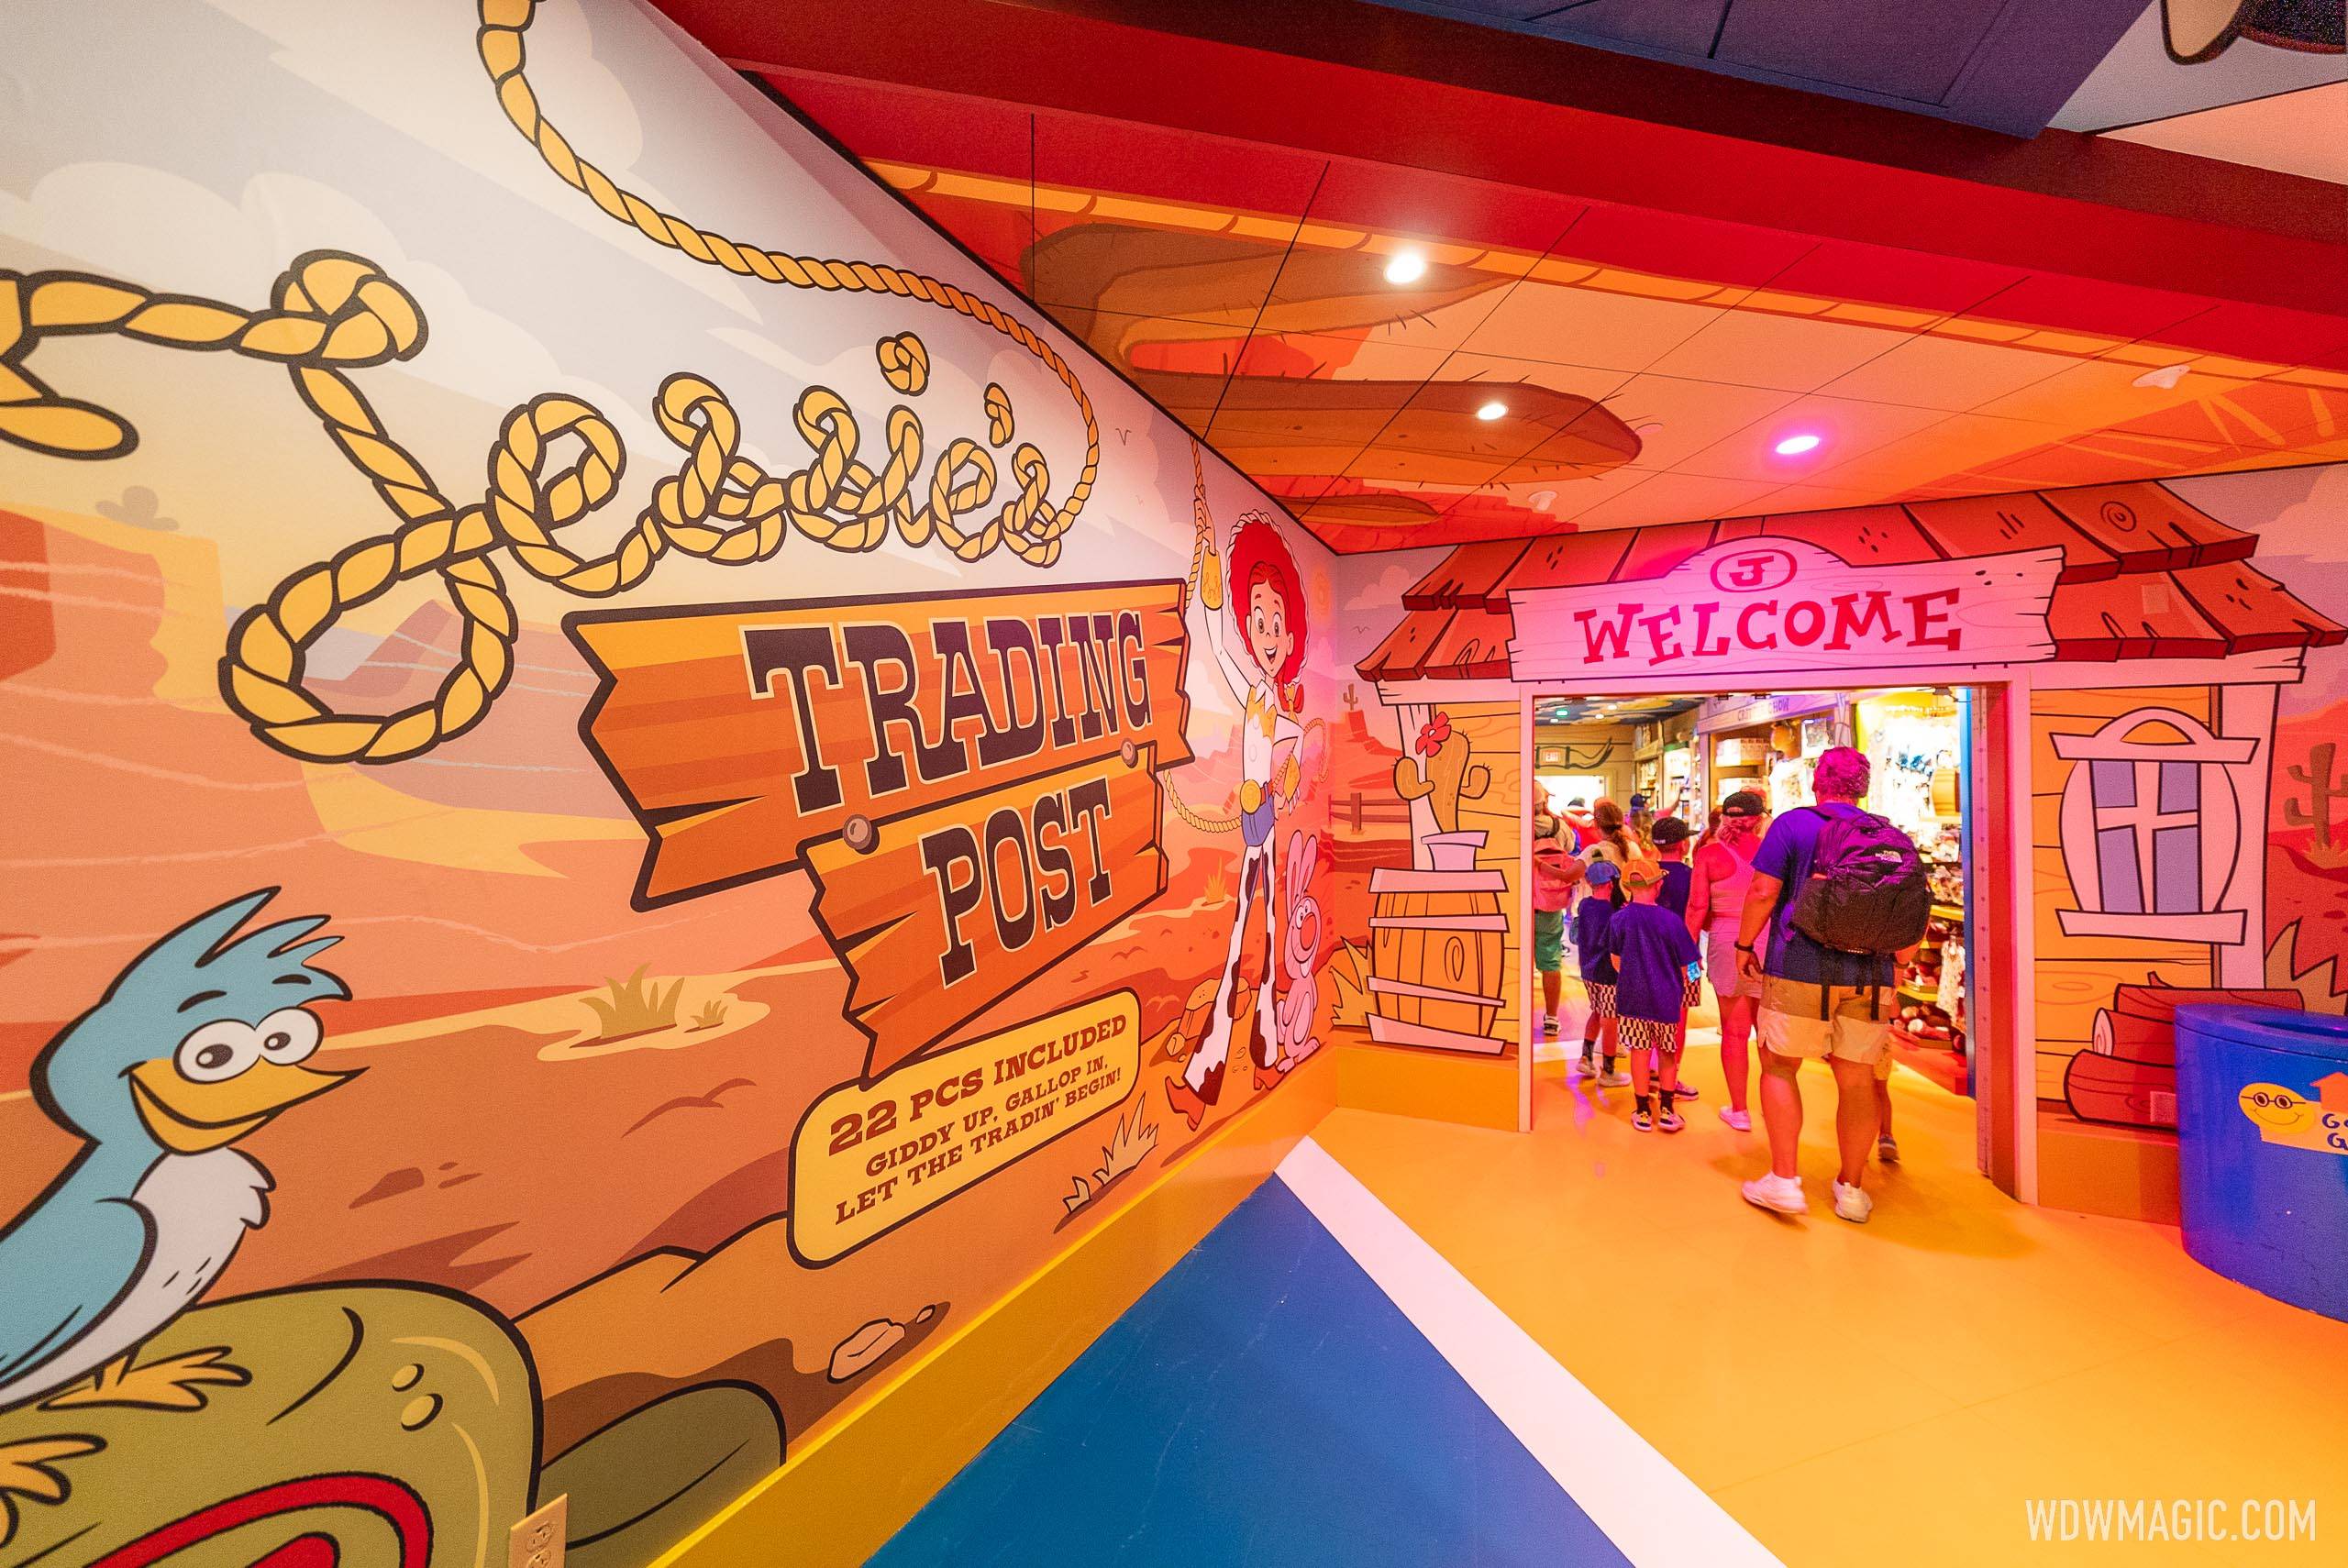 Yee-haw! Toy Story Meet and Greets Return to Disney Park - Inside